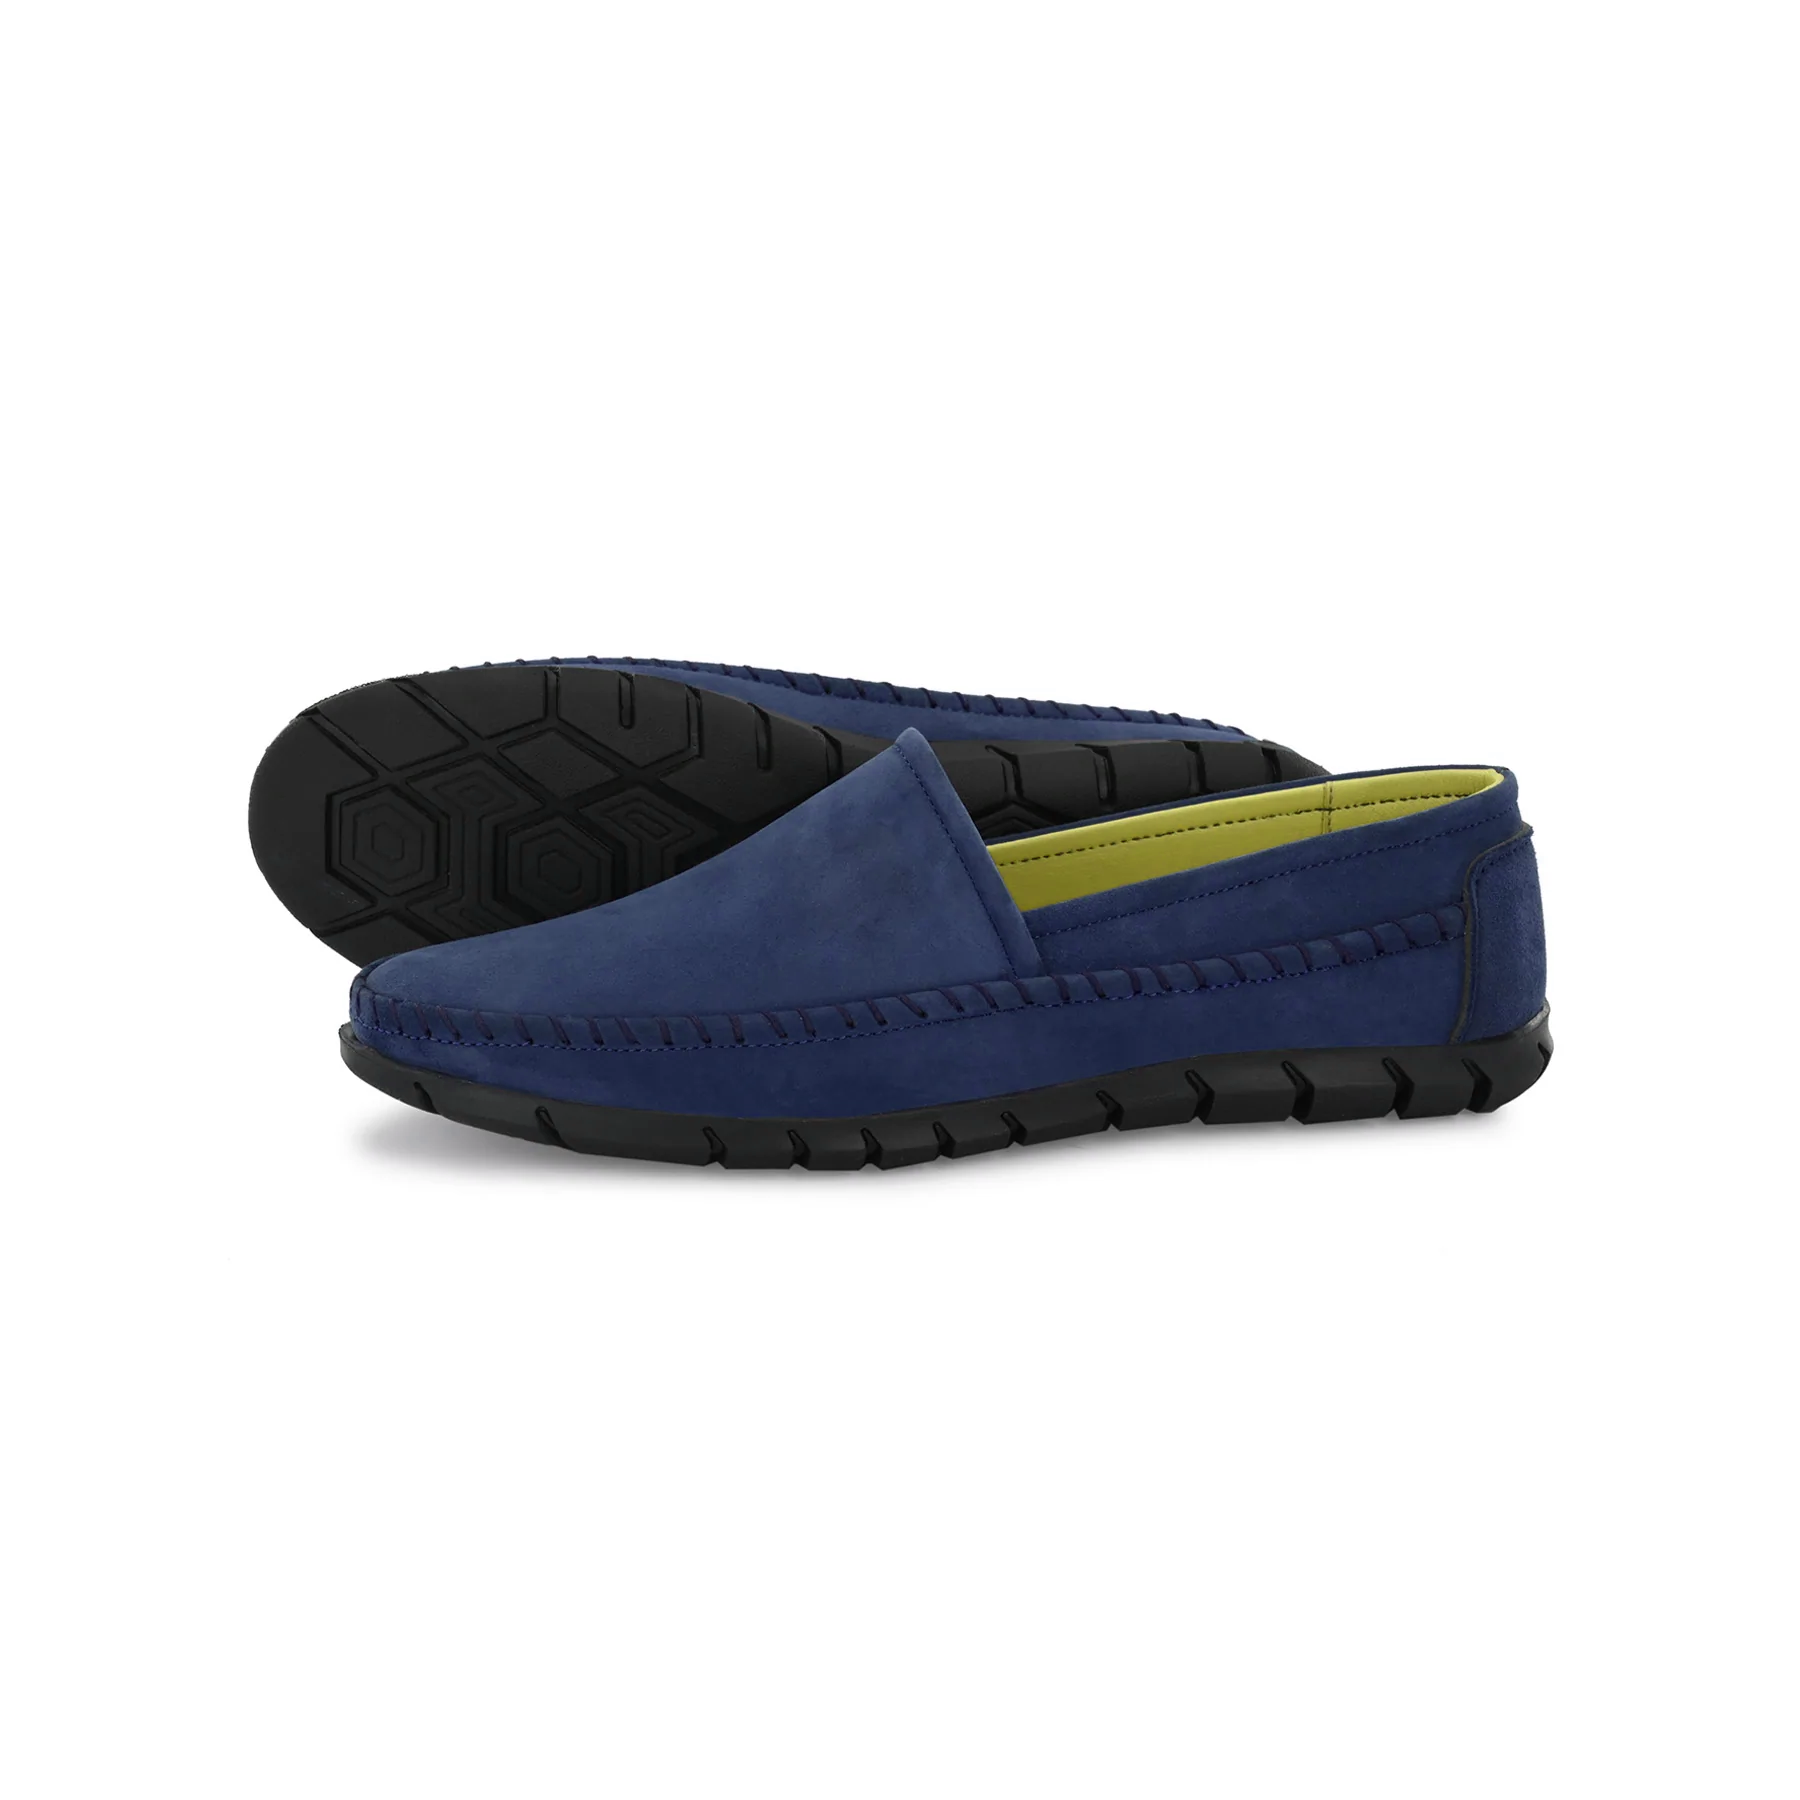 Simba Classic Blue Suede Leather Loafer